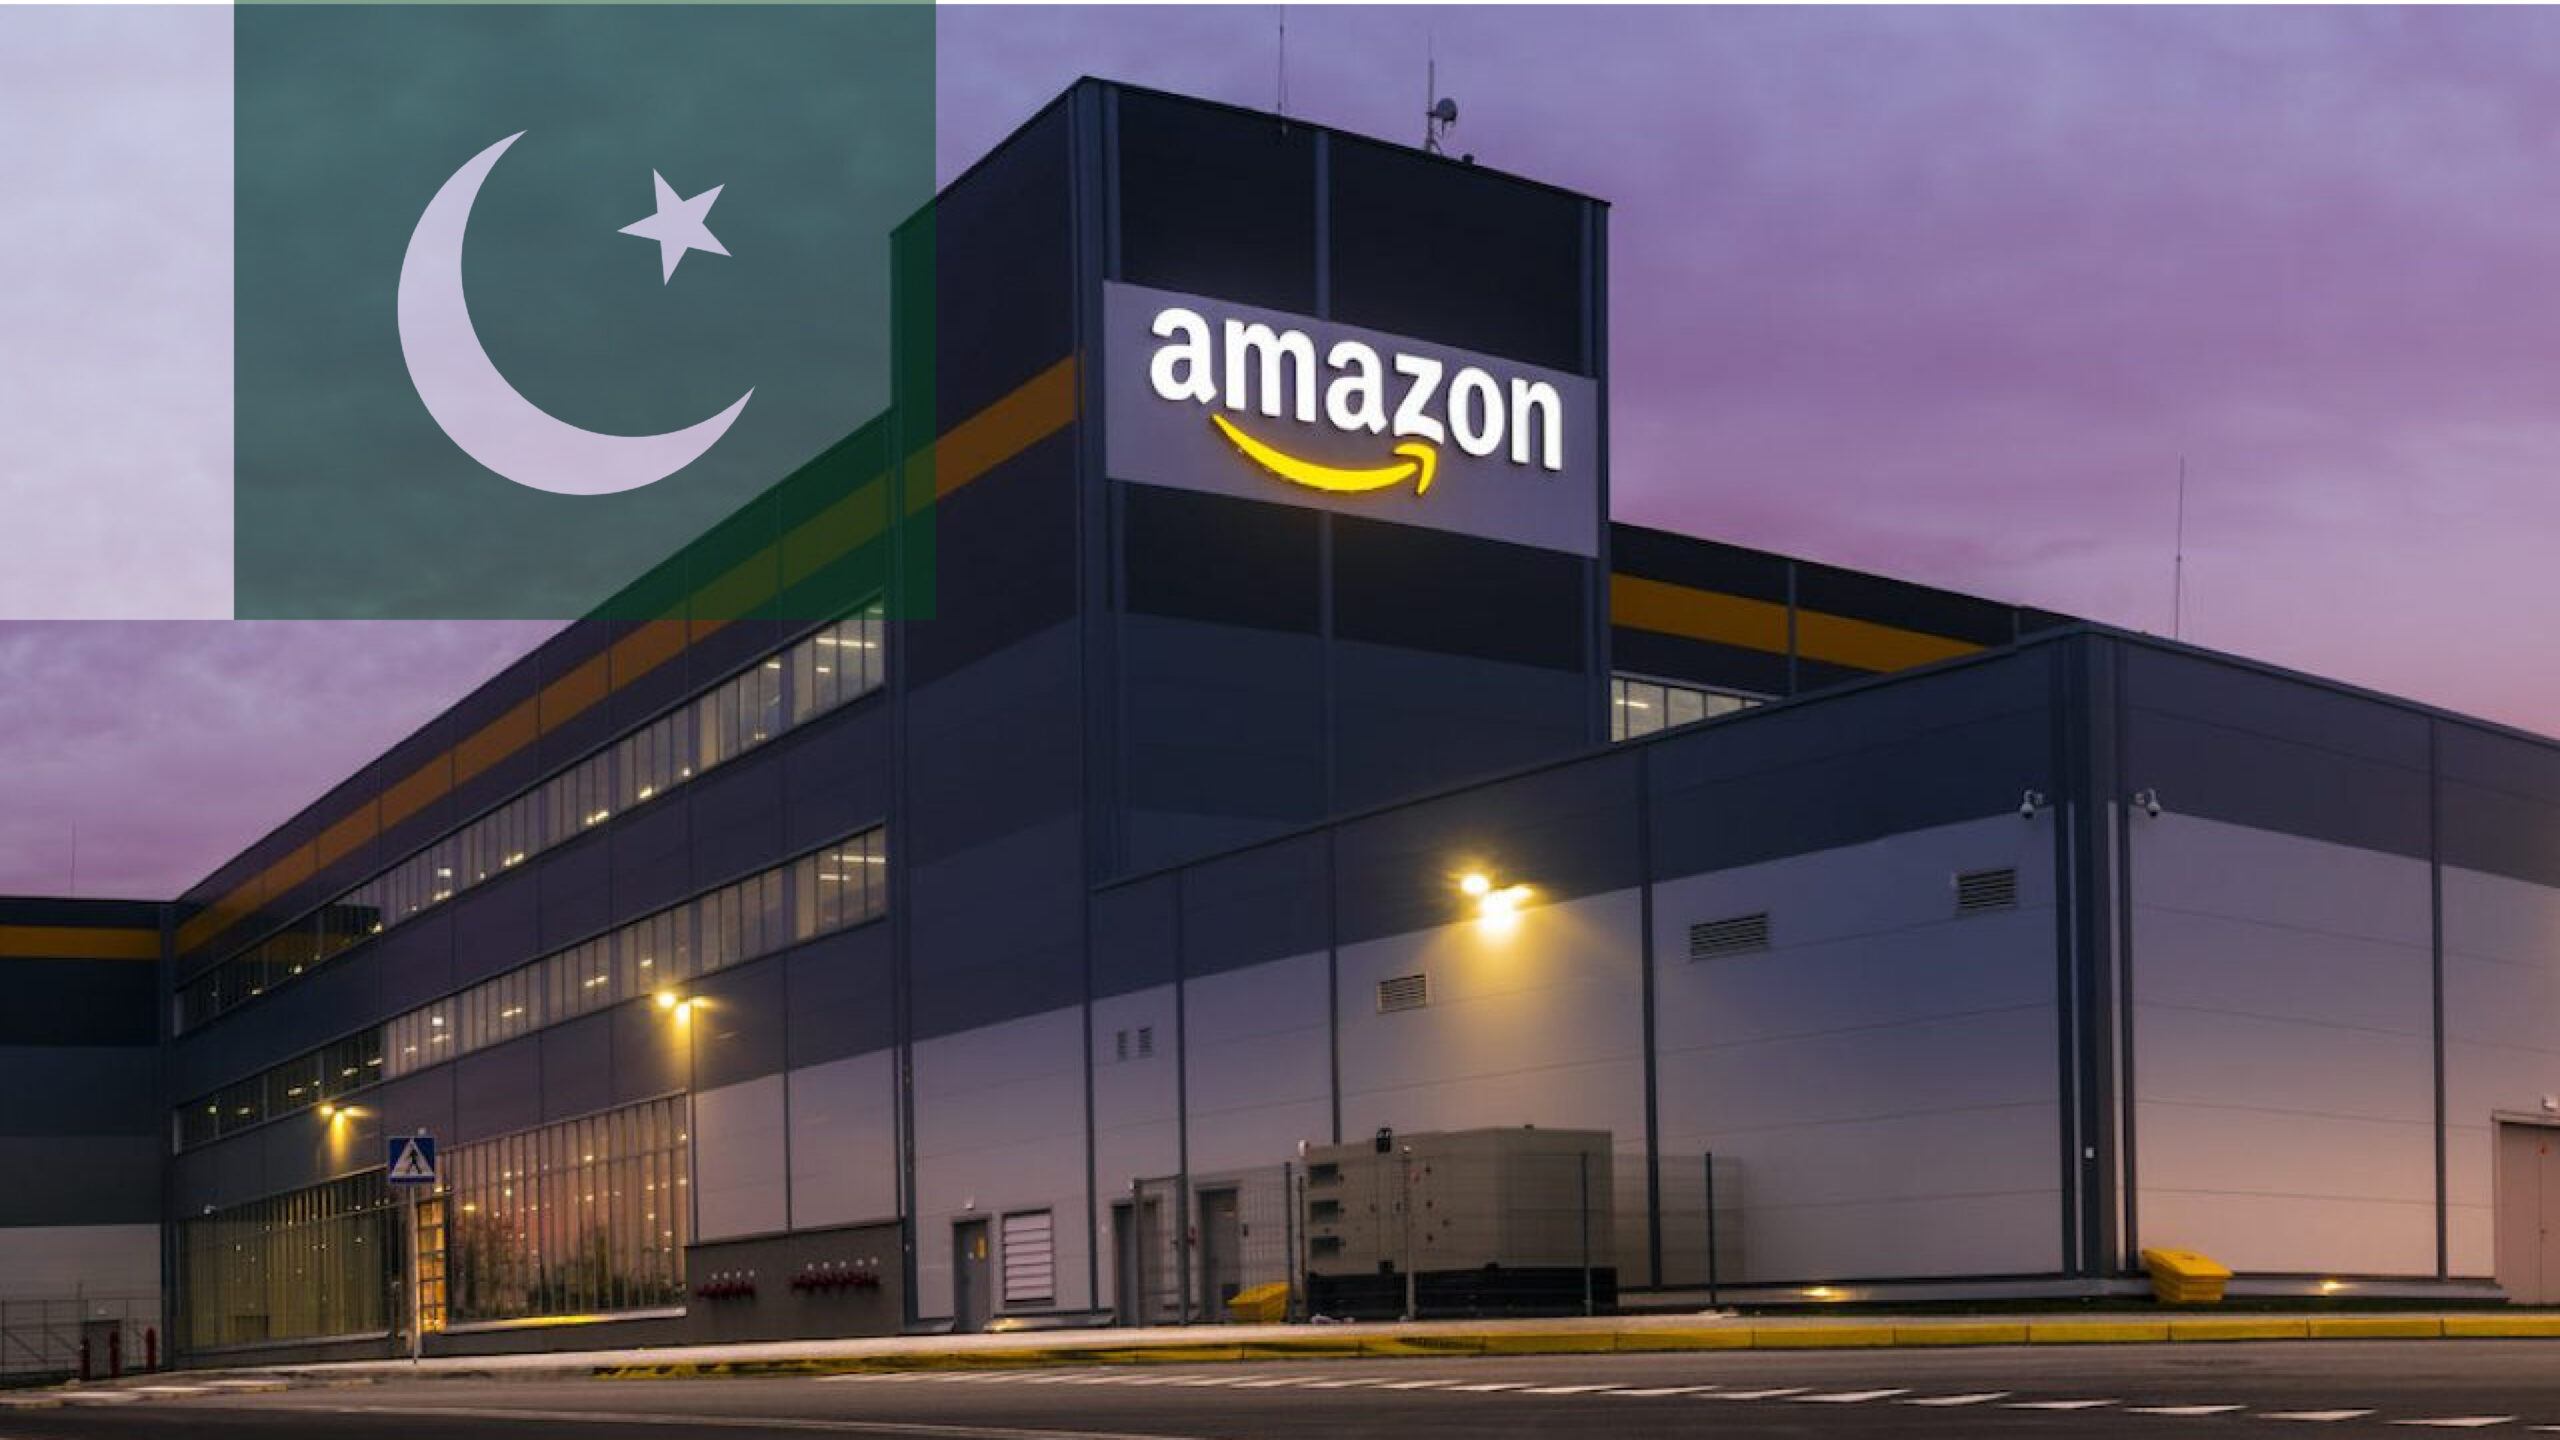 Pakistan is the new addition to Amazon’s list